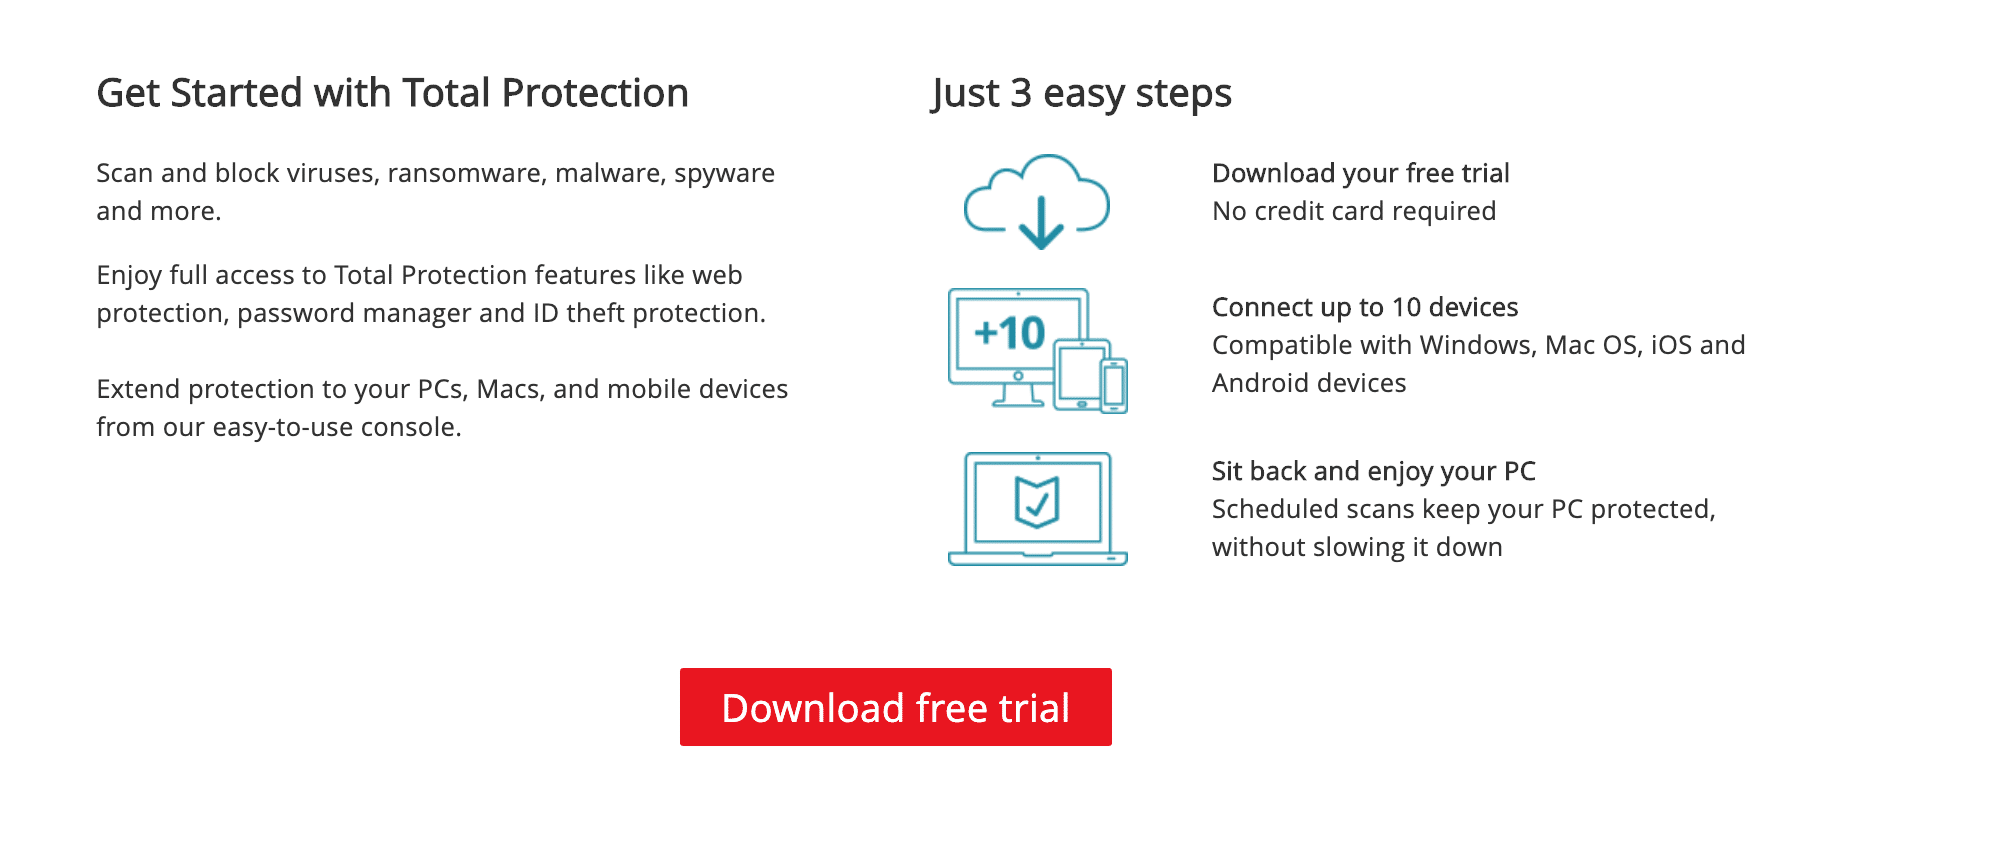 how to get free trial from McAfee website